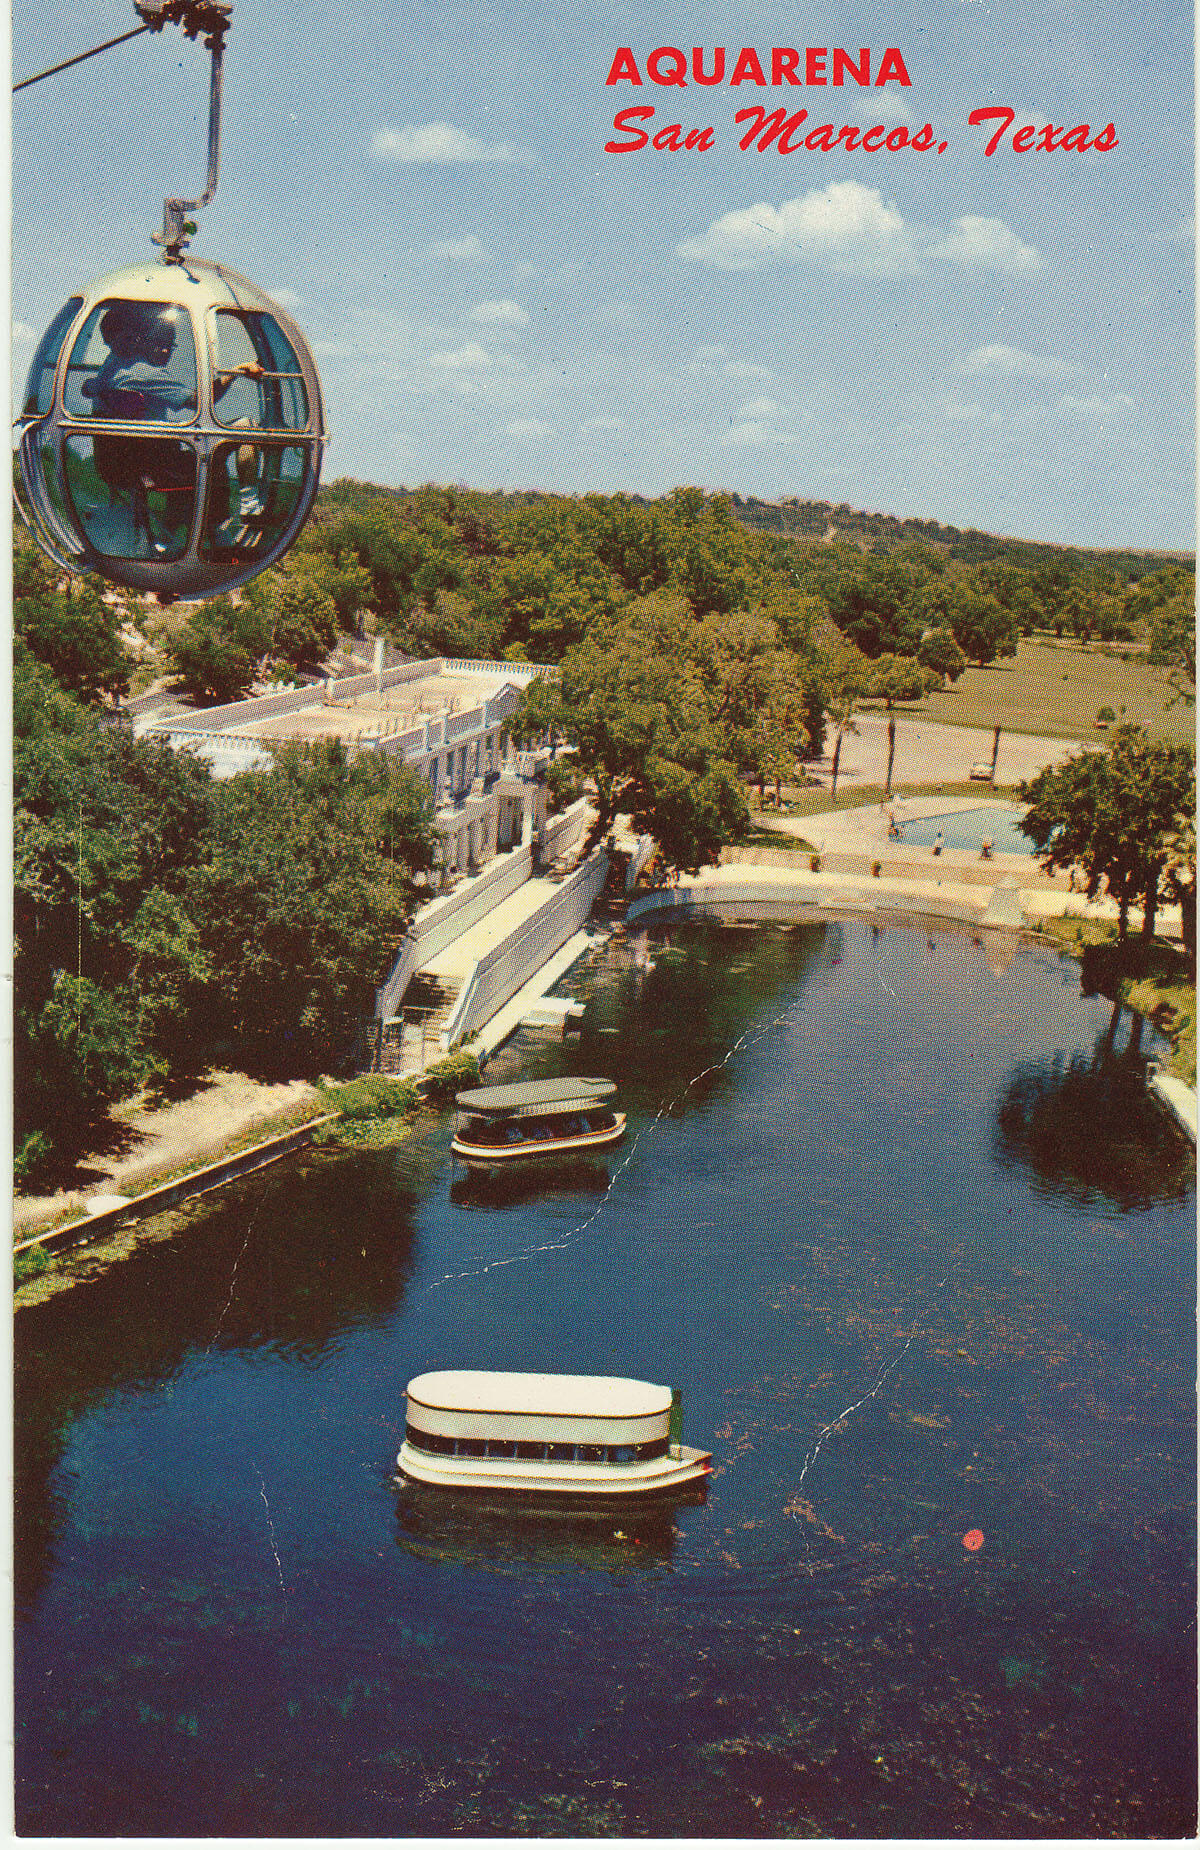 A bright blue postcard showing an overhead view of Aquarena Springs and a sky ride